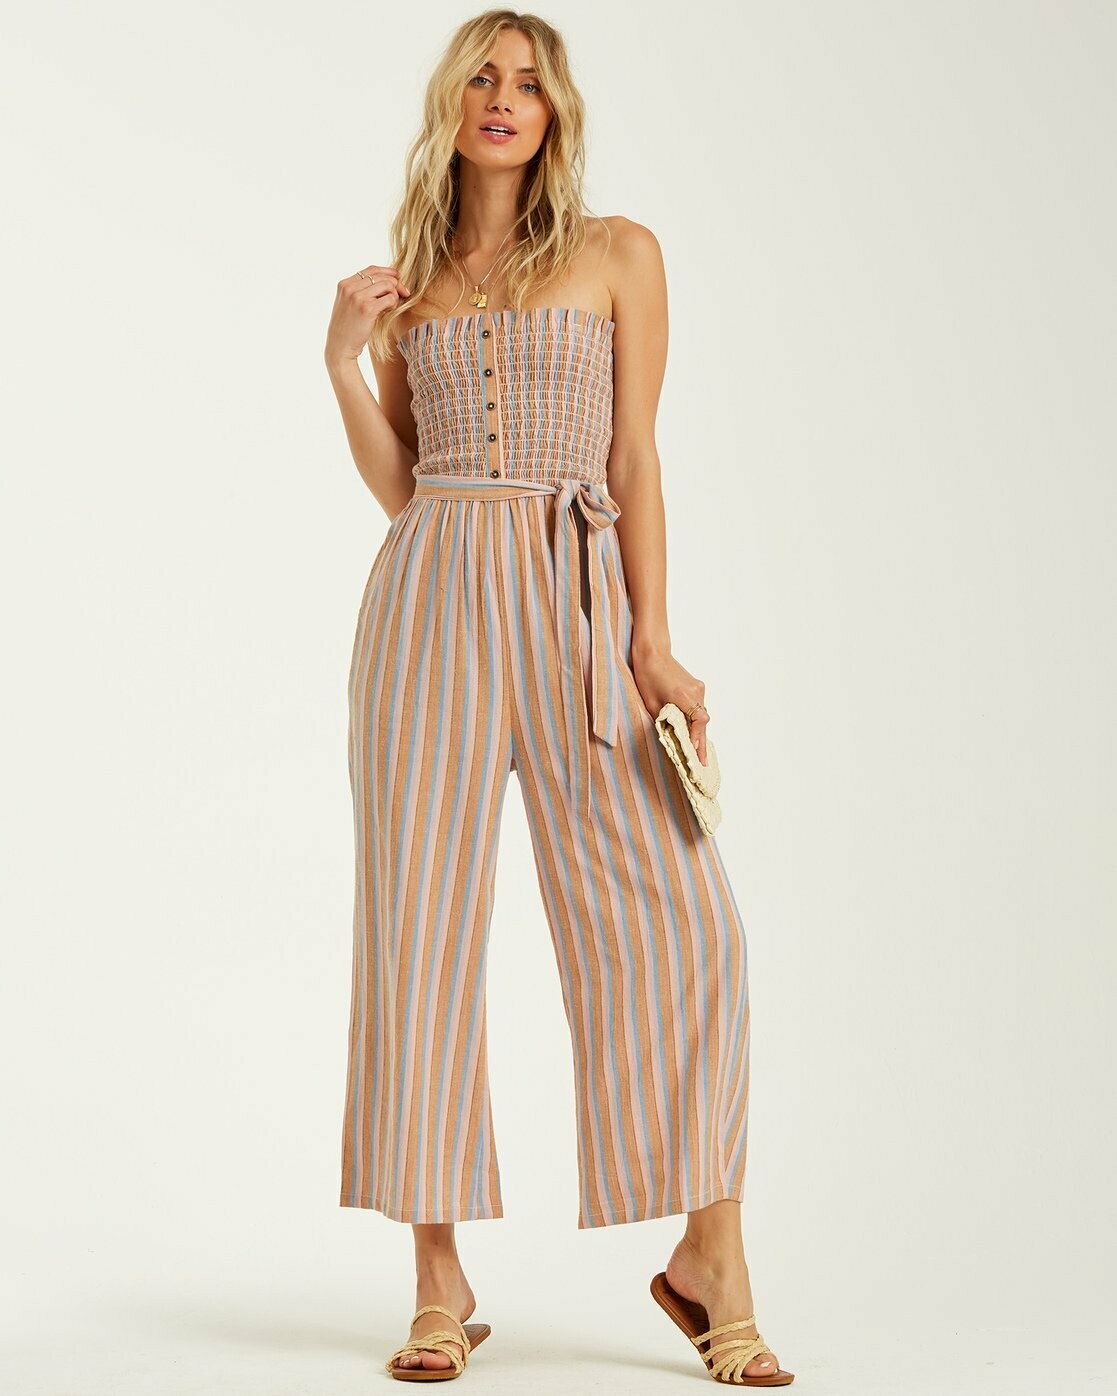 A Strapless Jumpsuit Shoppers Love Is on Sale at